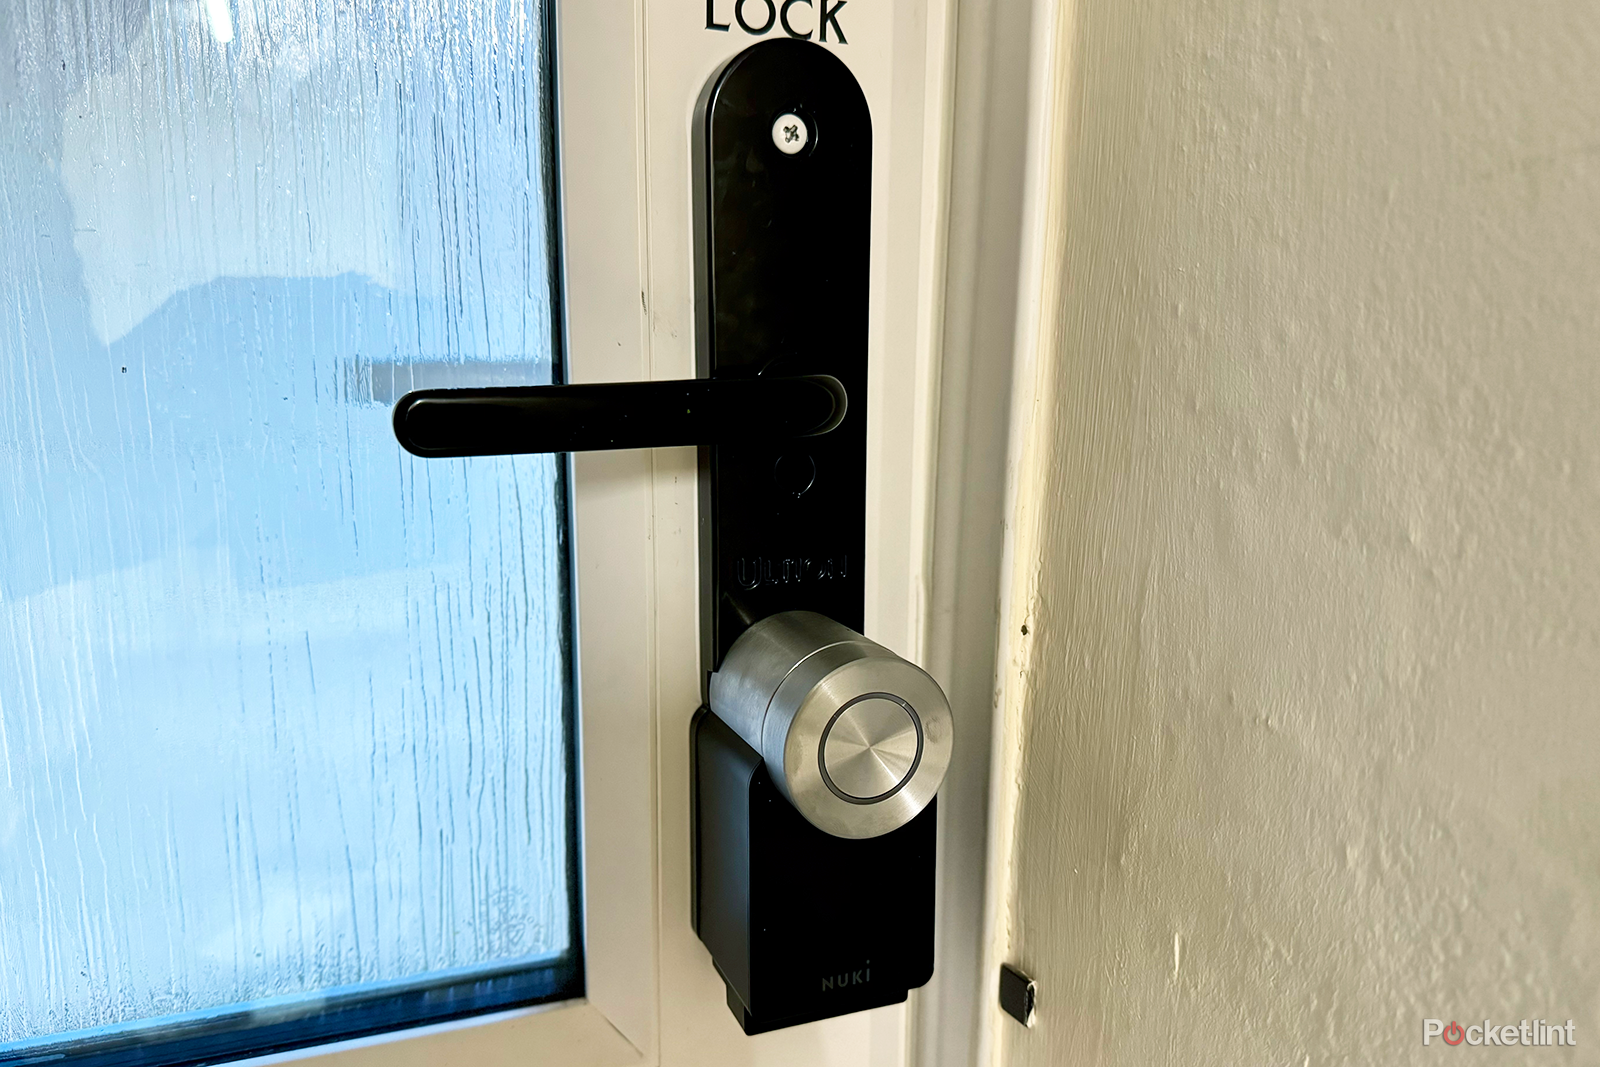 Ultion Nuki is a savvy smart lock for safety